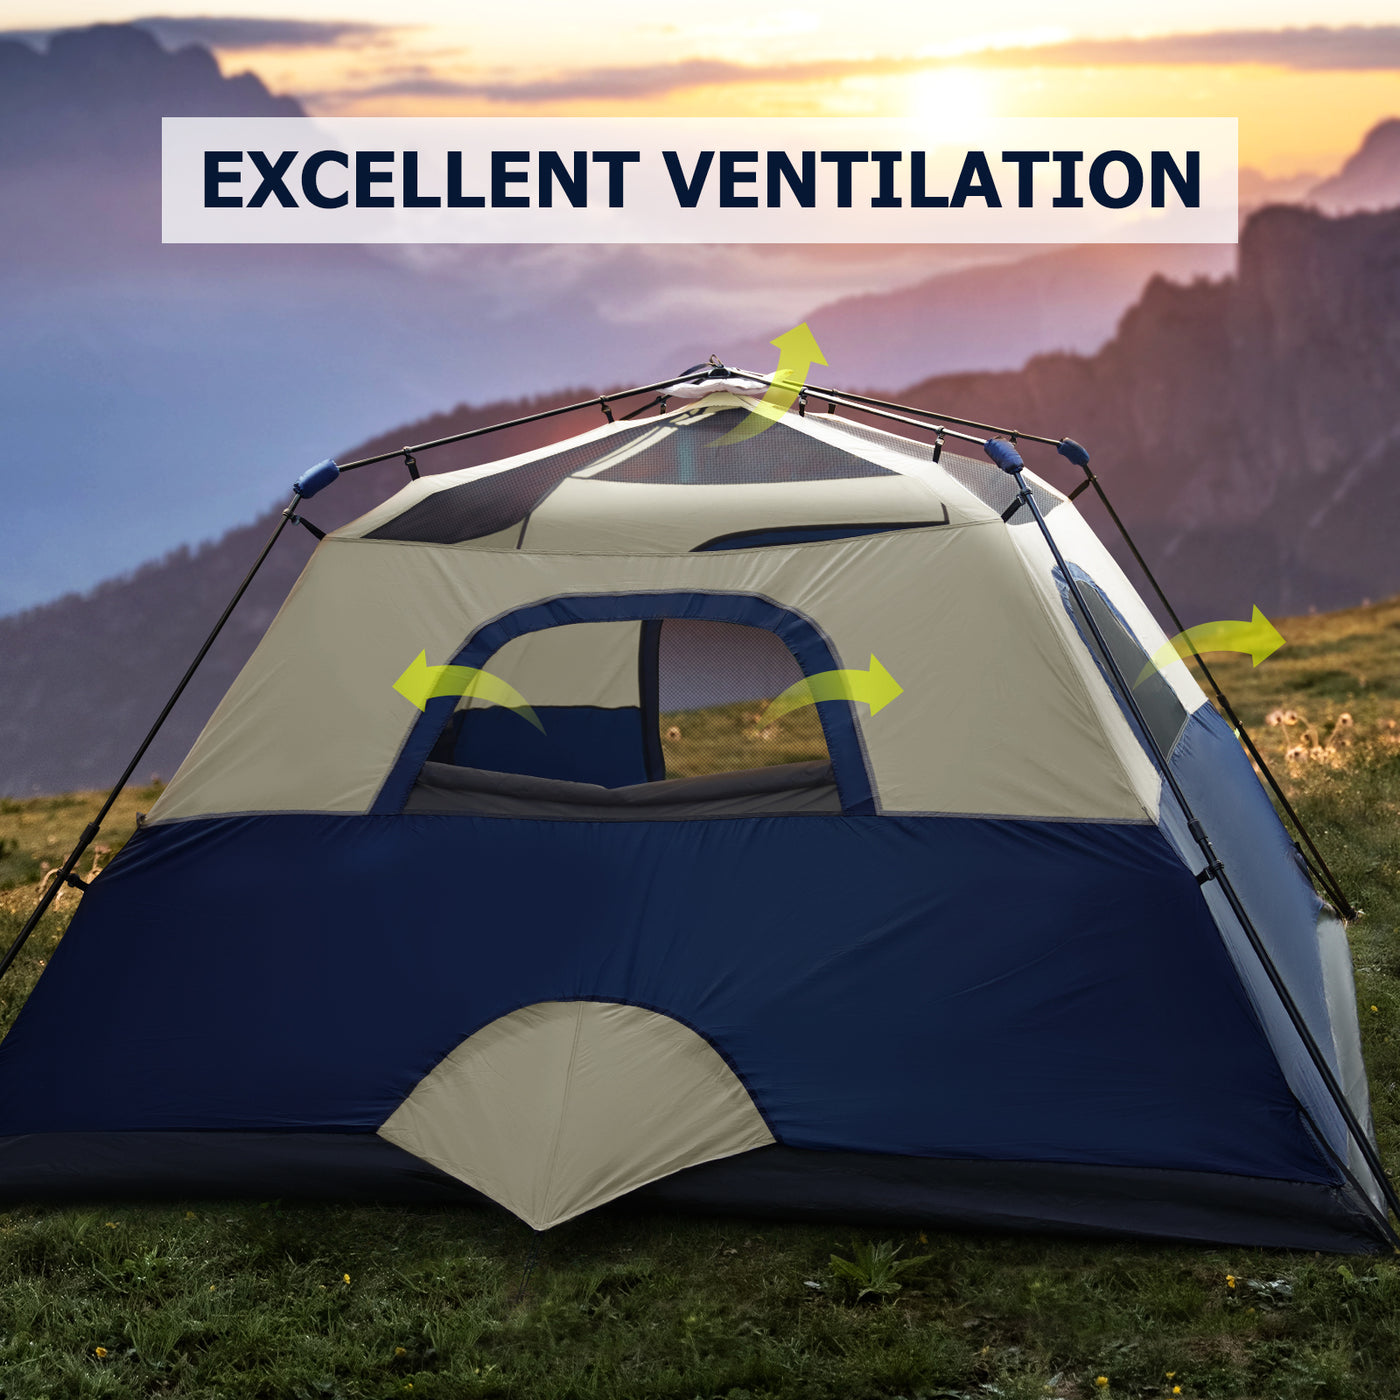 BeyondHOME Instant Cabin 6 Person Camping Tent-Sky Blue